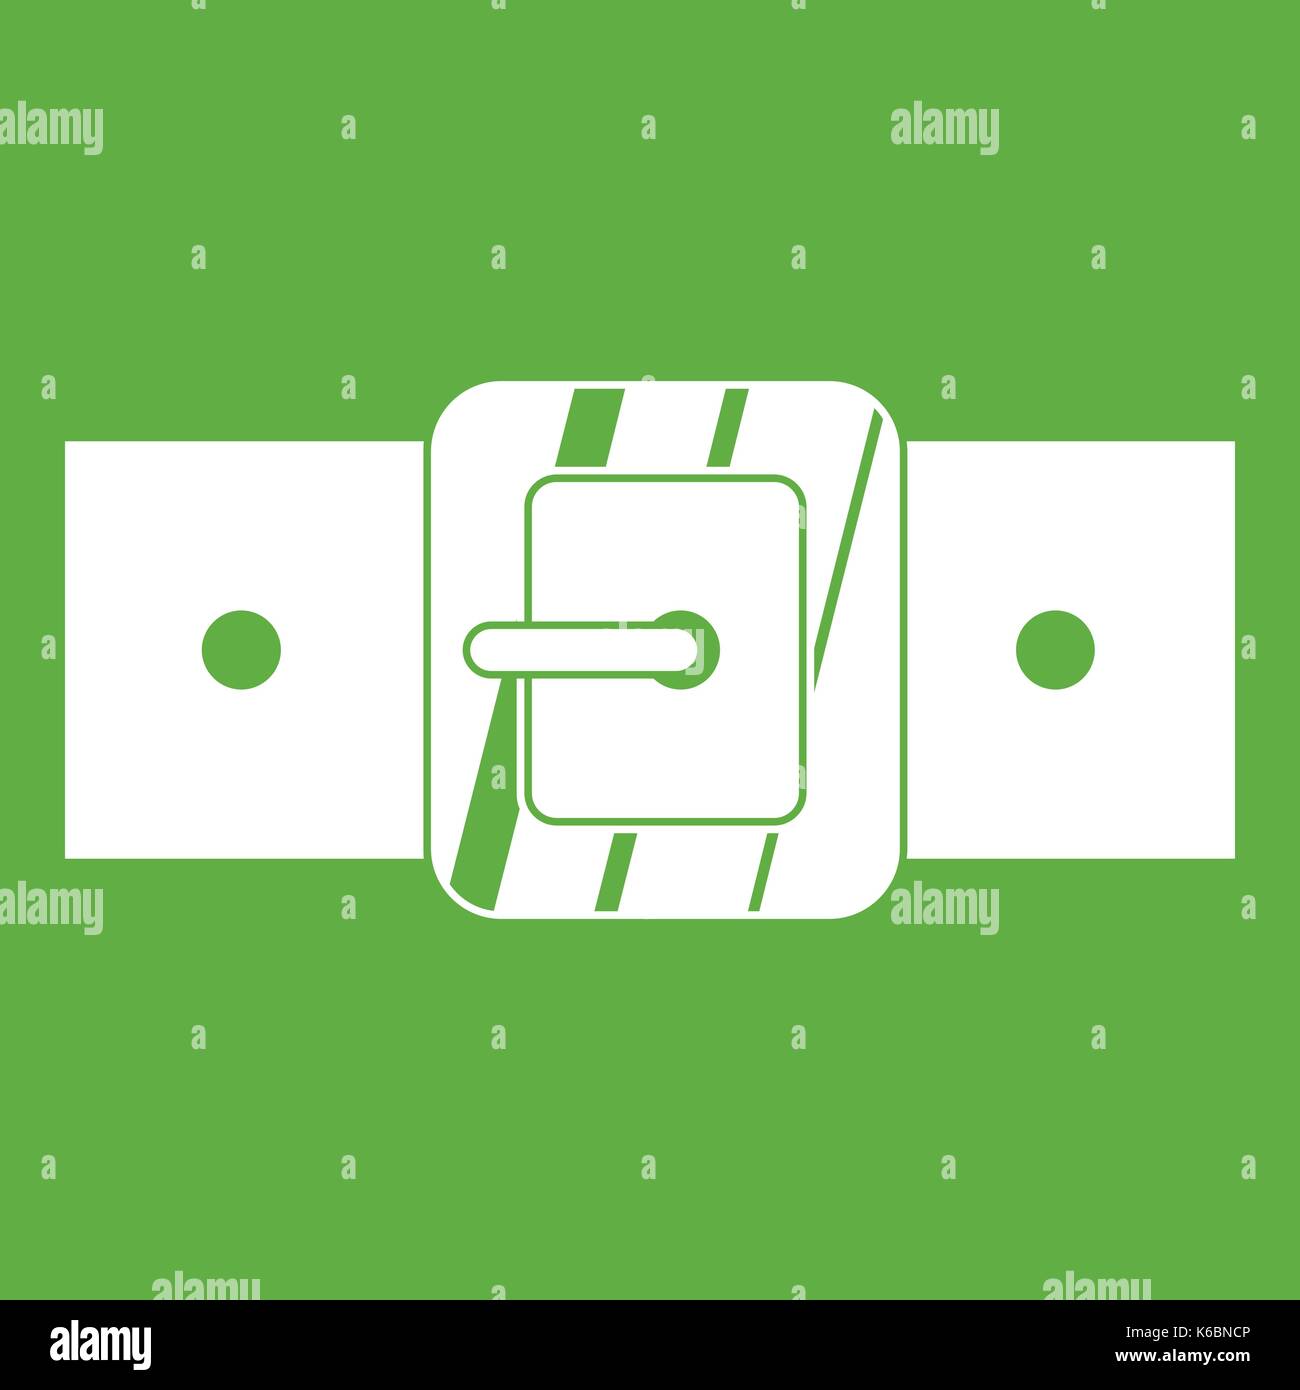 Square belt buckle icon green Stock Vector